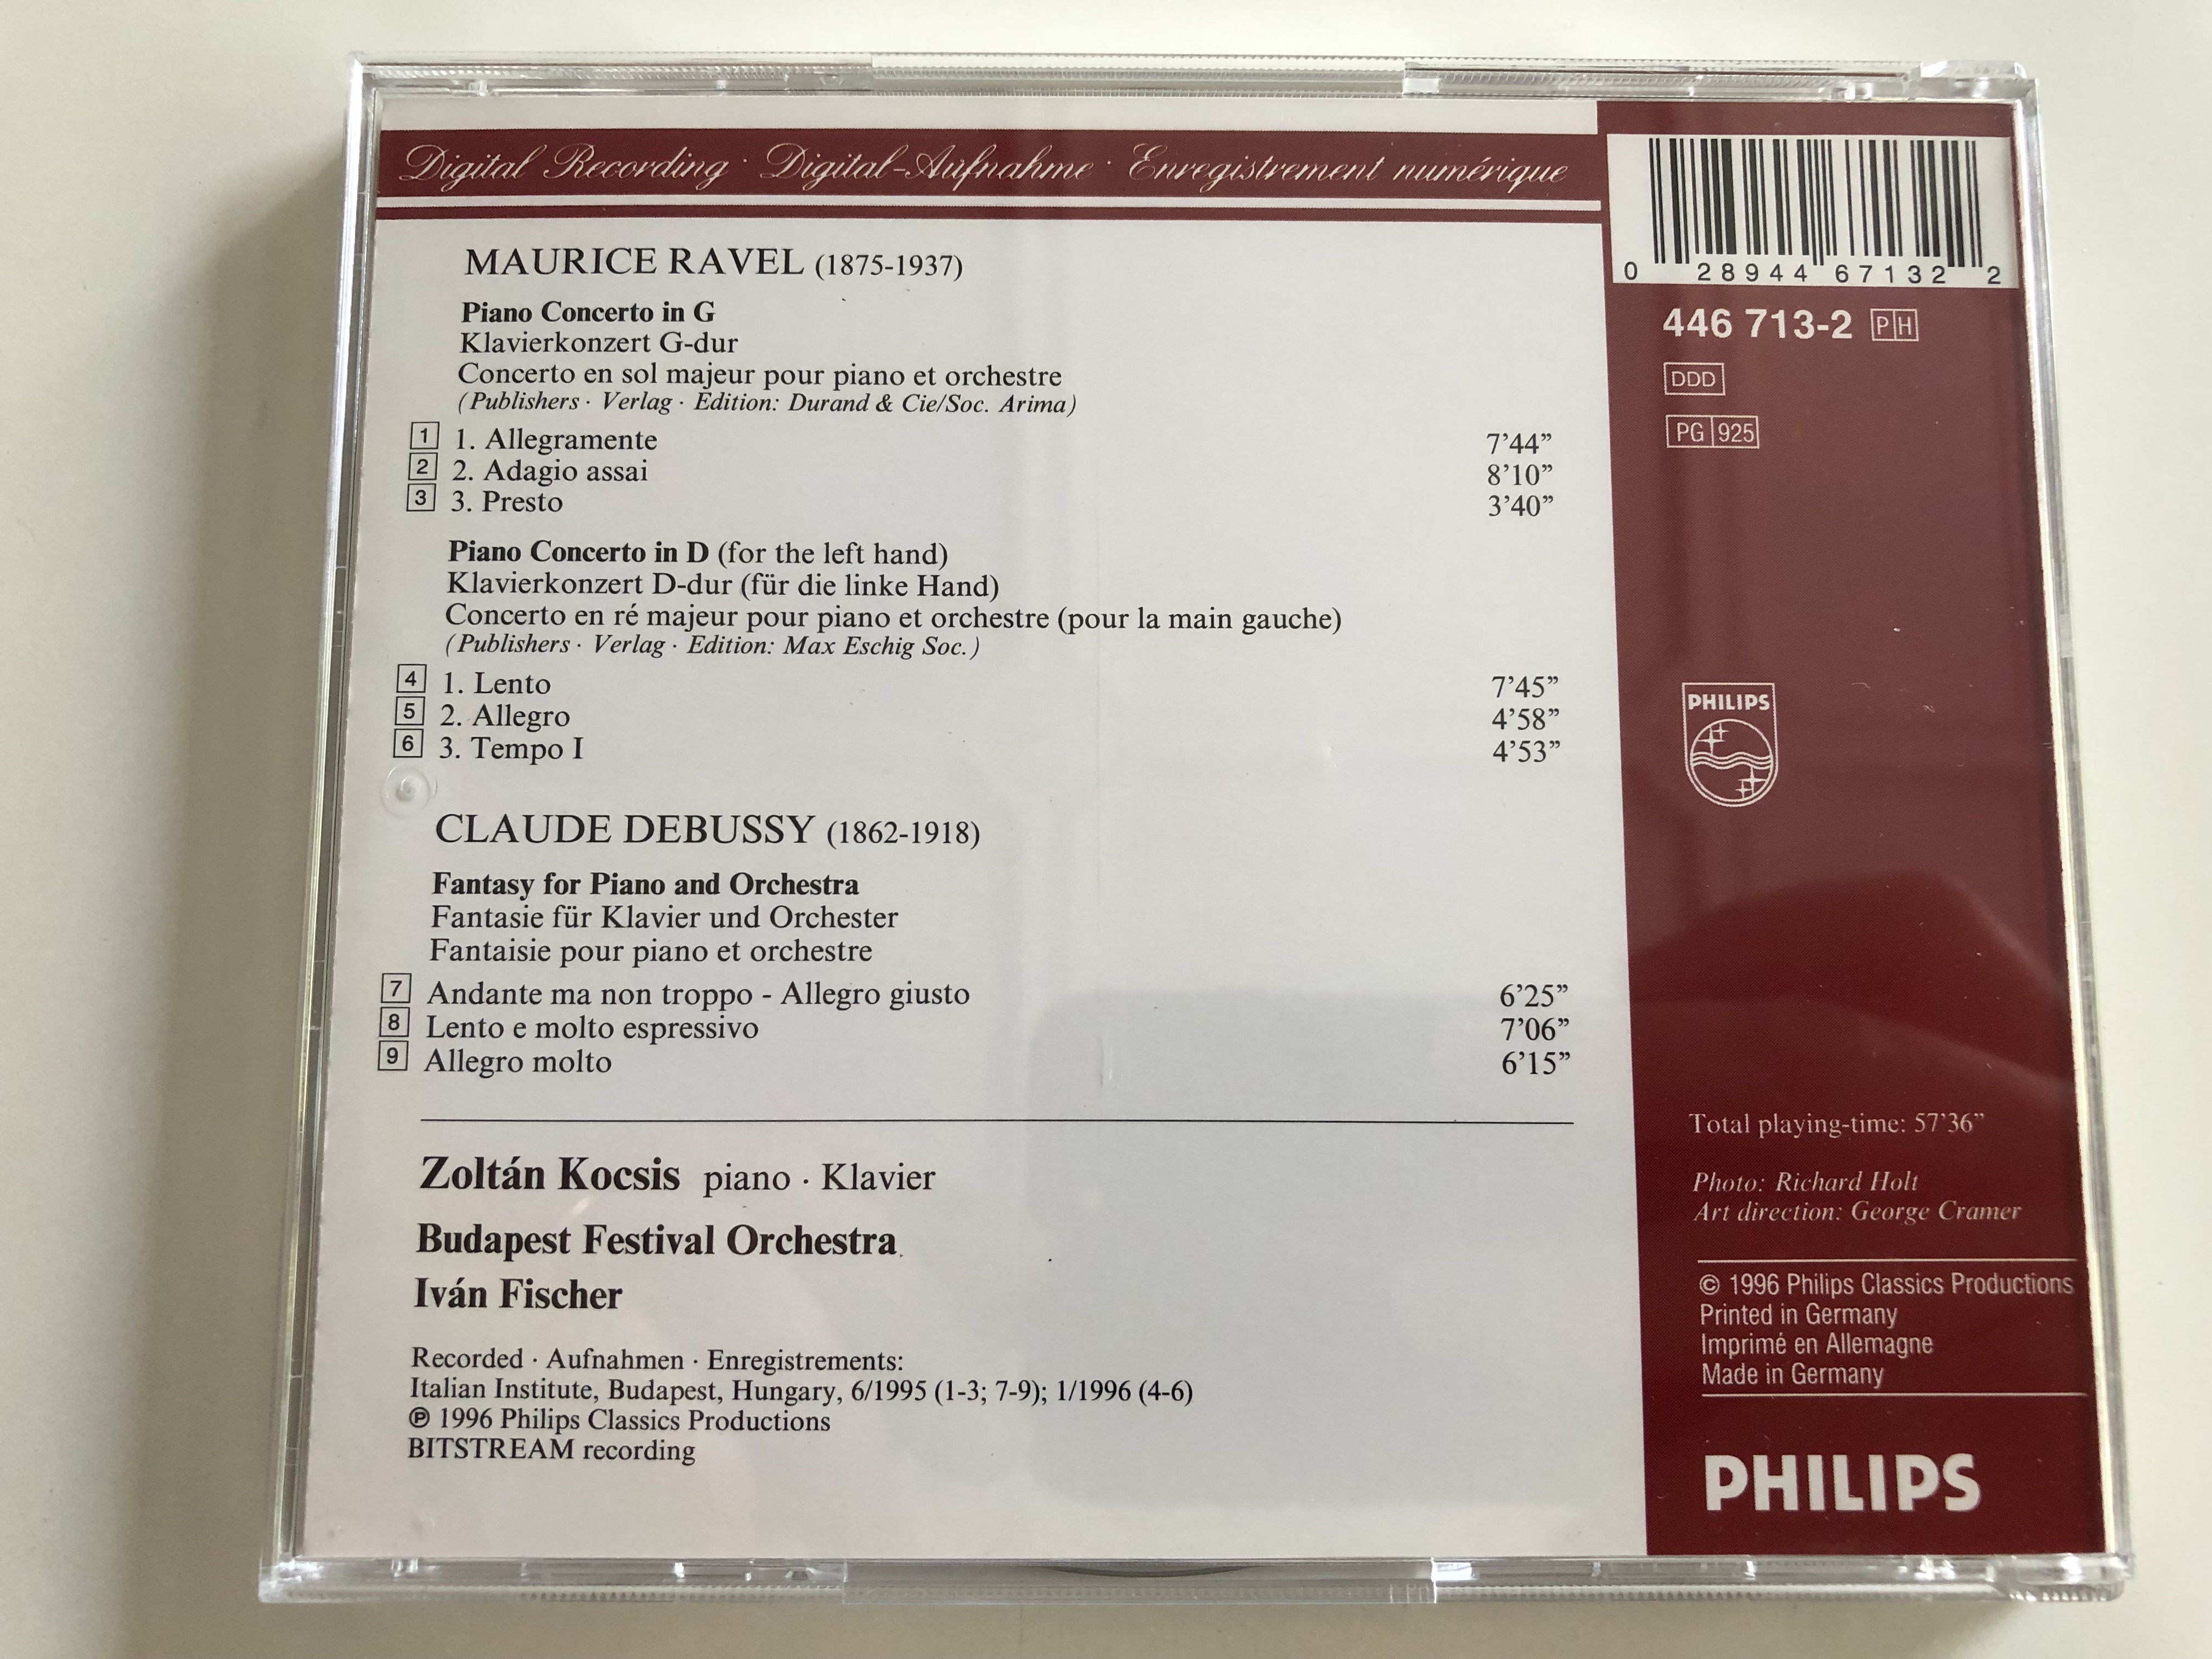 ravel-the-two-piano-concertos-debussy-fantasie-for-piano-and-orchestra-zolt-n-kocsis-piano-budapest-festival-orchestra-conducted-by-iv-n-fischer-philips-digital-classics-audio-cd-1996-446-713-2-6-.jpg